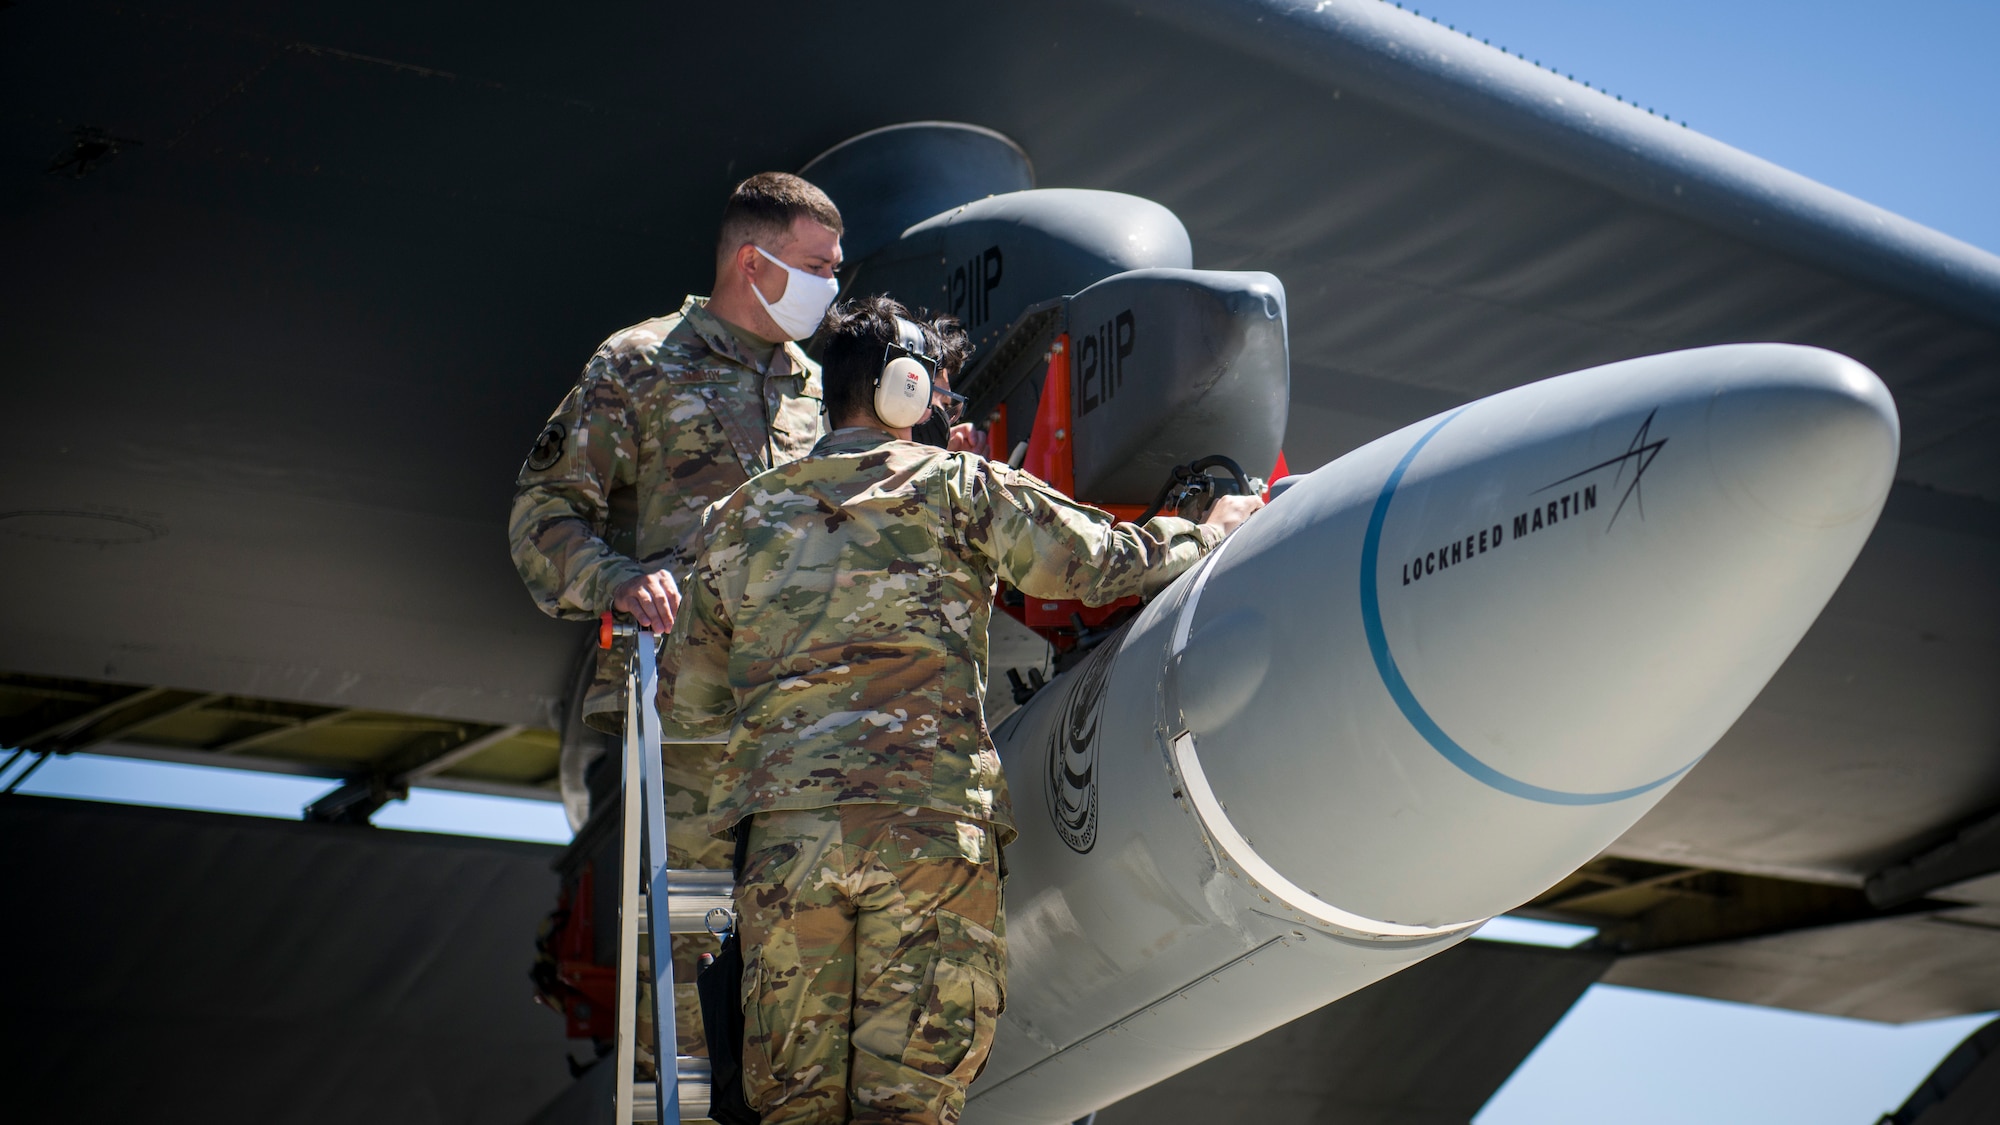 Air Force completes another successful hypersonic test > Edwards Air Force Base > News